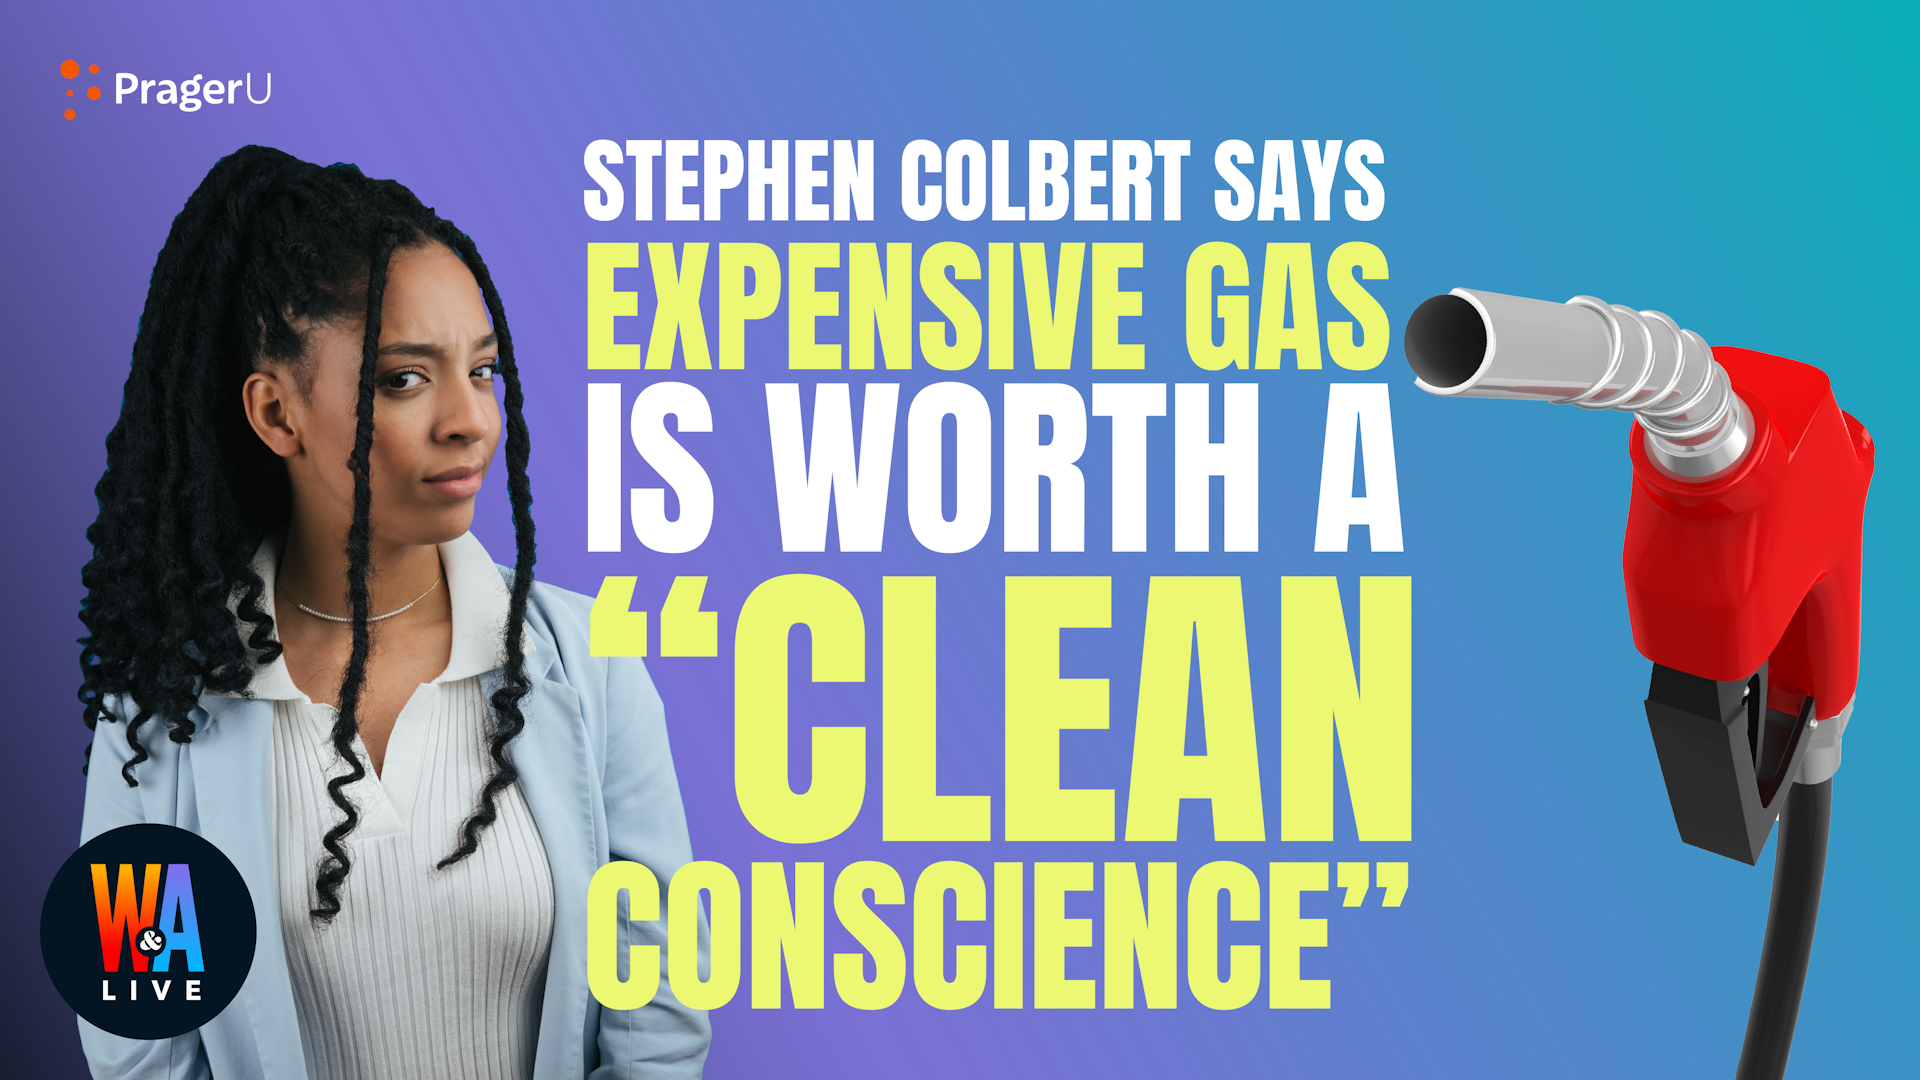 Stephen Colbert Says Expensive Gas Is Worth a “Clean Conscience”: 3/8/2022